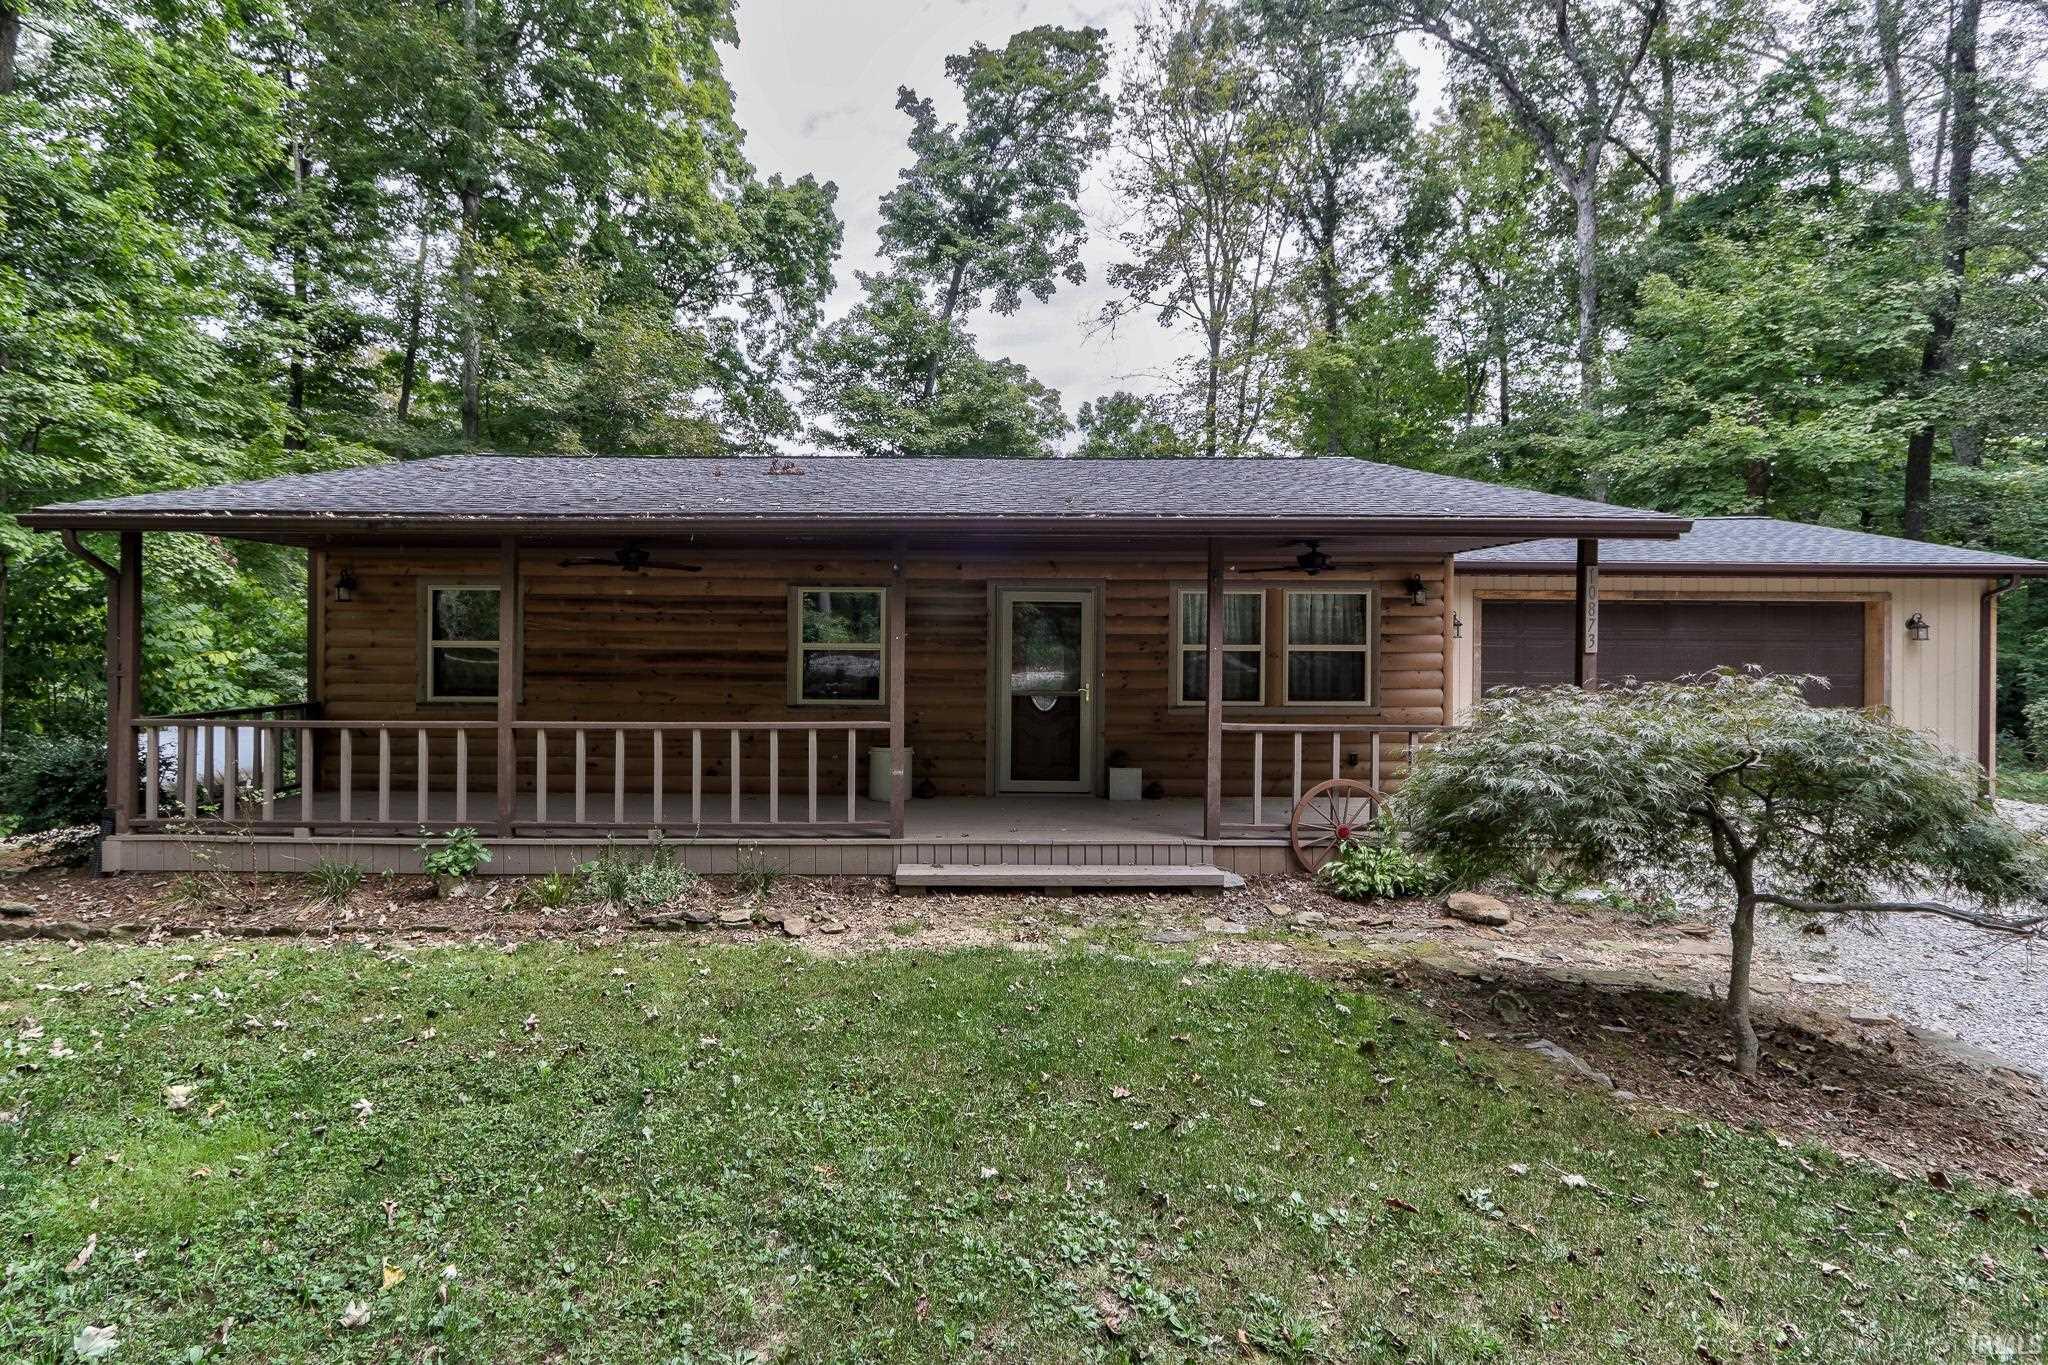 Enjoy lake living with this completely remodeled 3 bedroom, 1.5 bathroom home in Lake Helmerich Village! Don't miss out on your chance to own a home located on 4 lots, totaling over 6 acres of wooded land in a peaceful and quiet setting.  As you approach the home, you're greeted by the welcoming front porch, which is the perfect place to drink your morning coffee. As you enter the home, you'll find a living room with plenty of natural light that flows into the updated kitchen. The eat-in kitchen features updated stainless steel appliances, beautiful painted cabinets, updated countertops, and original hardwood flooring. The spacious primary bedroom has the hardwood flooring and a private half bathroom that has an updated light fixture, vanity and toilet. There are two additional bedrooms that have hardwood flooring and updated ceiling fans. The full bathroom has a beautiful, updated vanity, light fixture, and toilet. You'll fall in love with the outdoor space when you visit this property! Attached 2 car garage, additional detached 1 car garage, AND a pole barn for all of the storage you could need! Updates include lighting, countertops, appliances, fresh paint, carpet, garage roof, windows, landscaping, and much more.